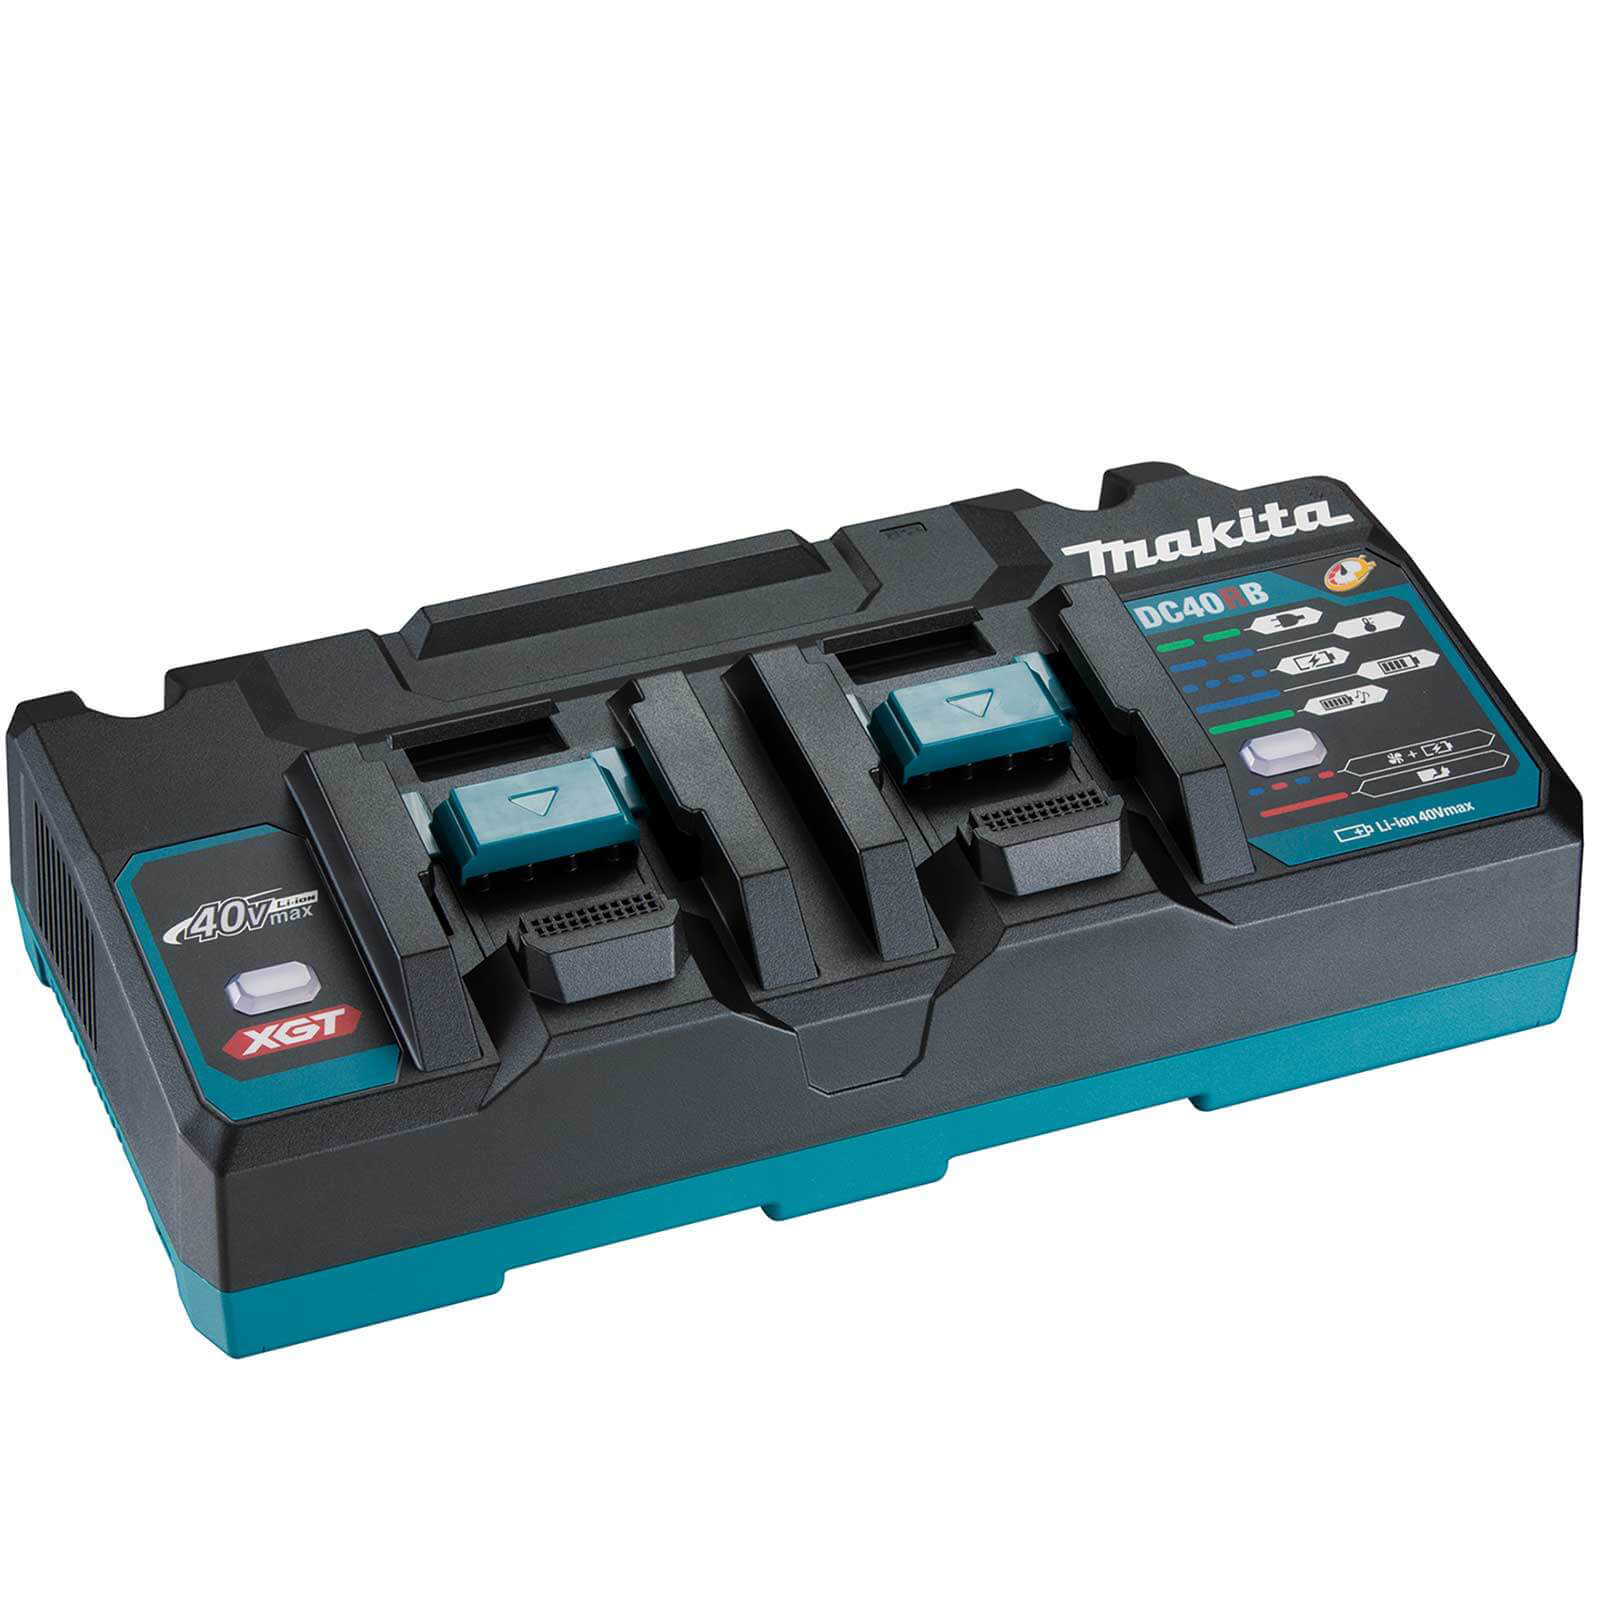 Photo of Makita Dc40rb Xgt 40v Max Twin Port Battery Fast Charger 240v